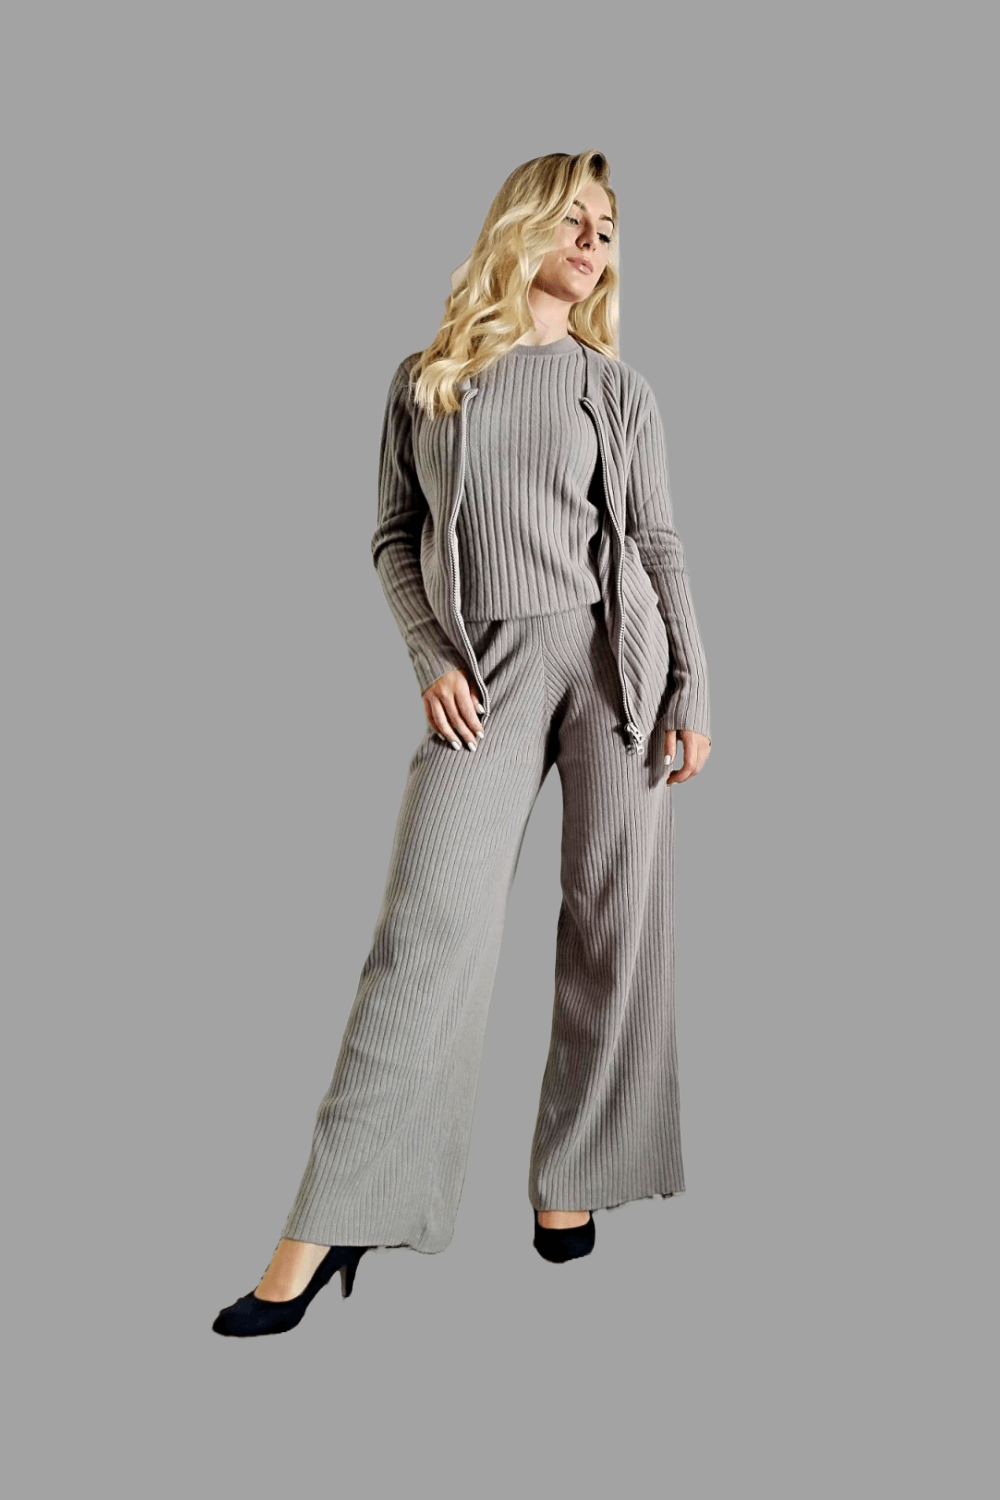 100% Cashmere Women's Knitwear Pure Cashmere Top and Trousers Grey